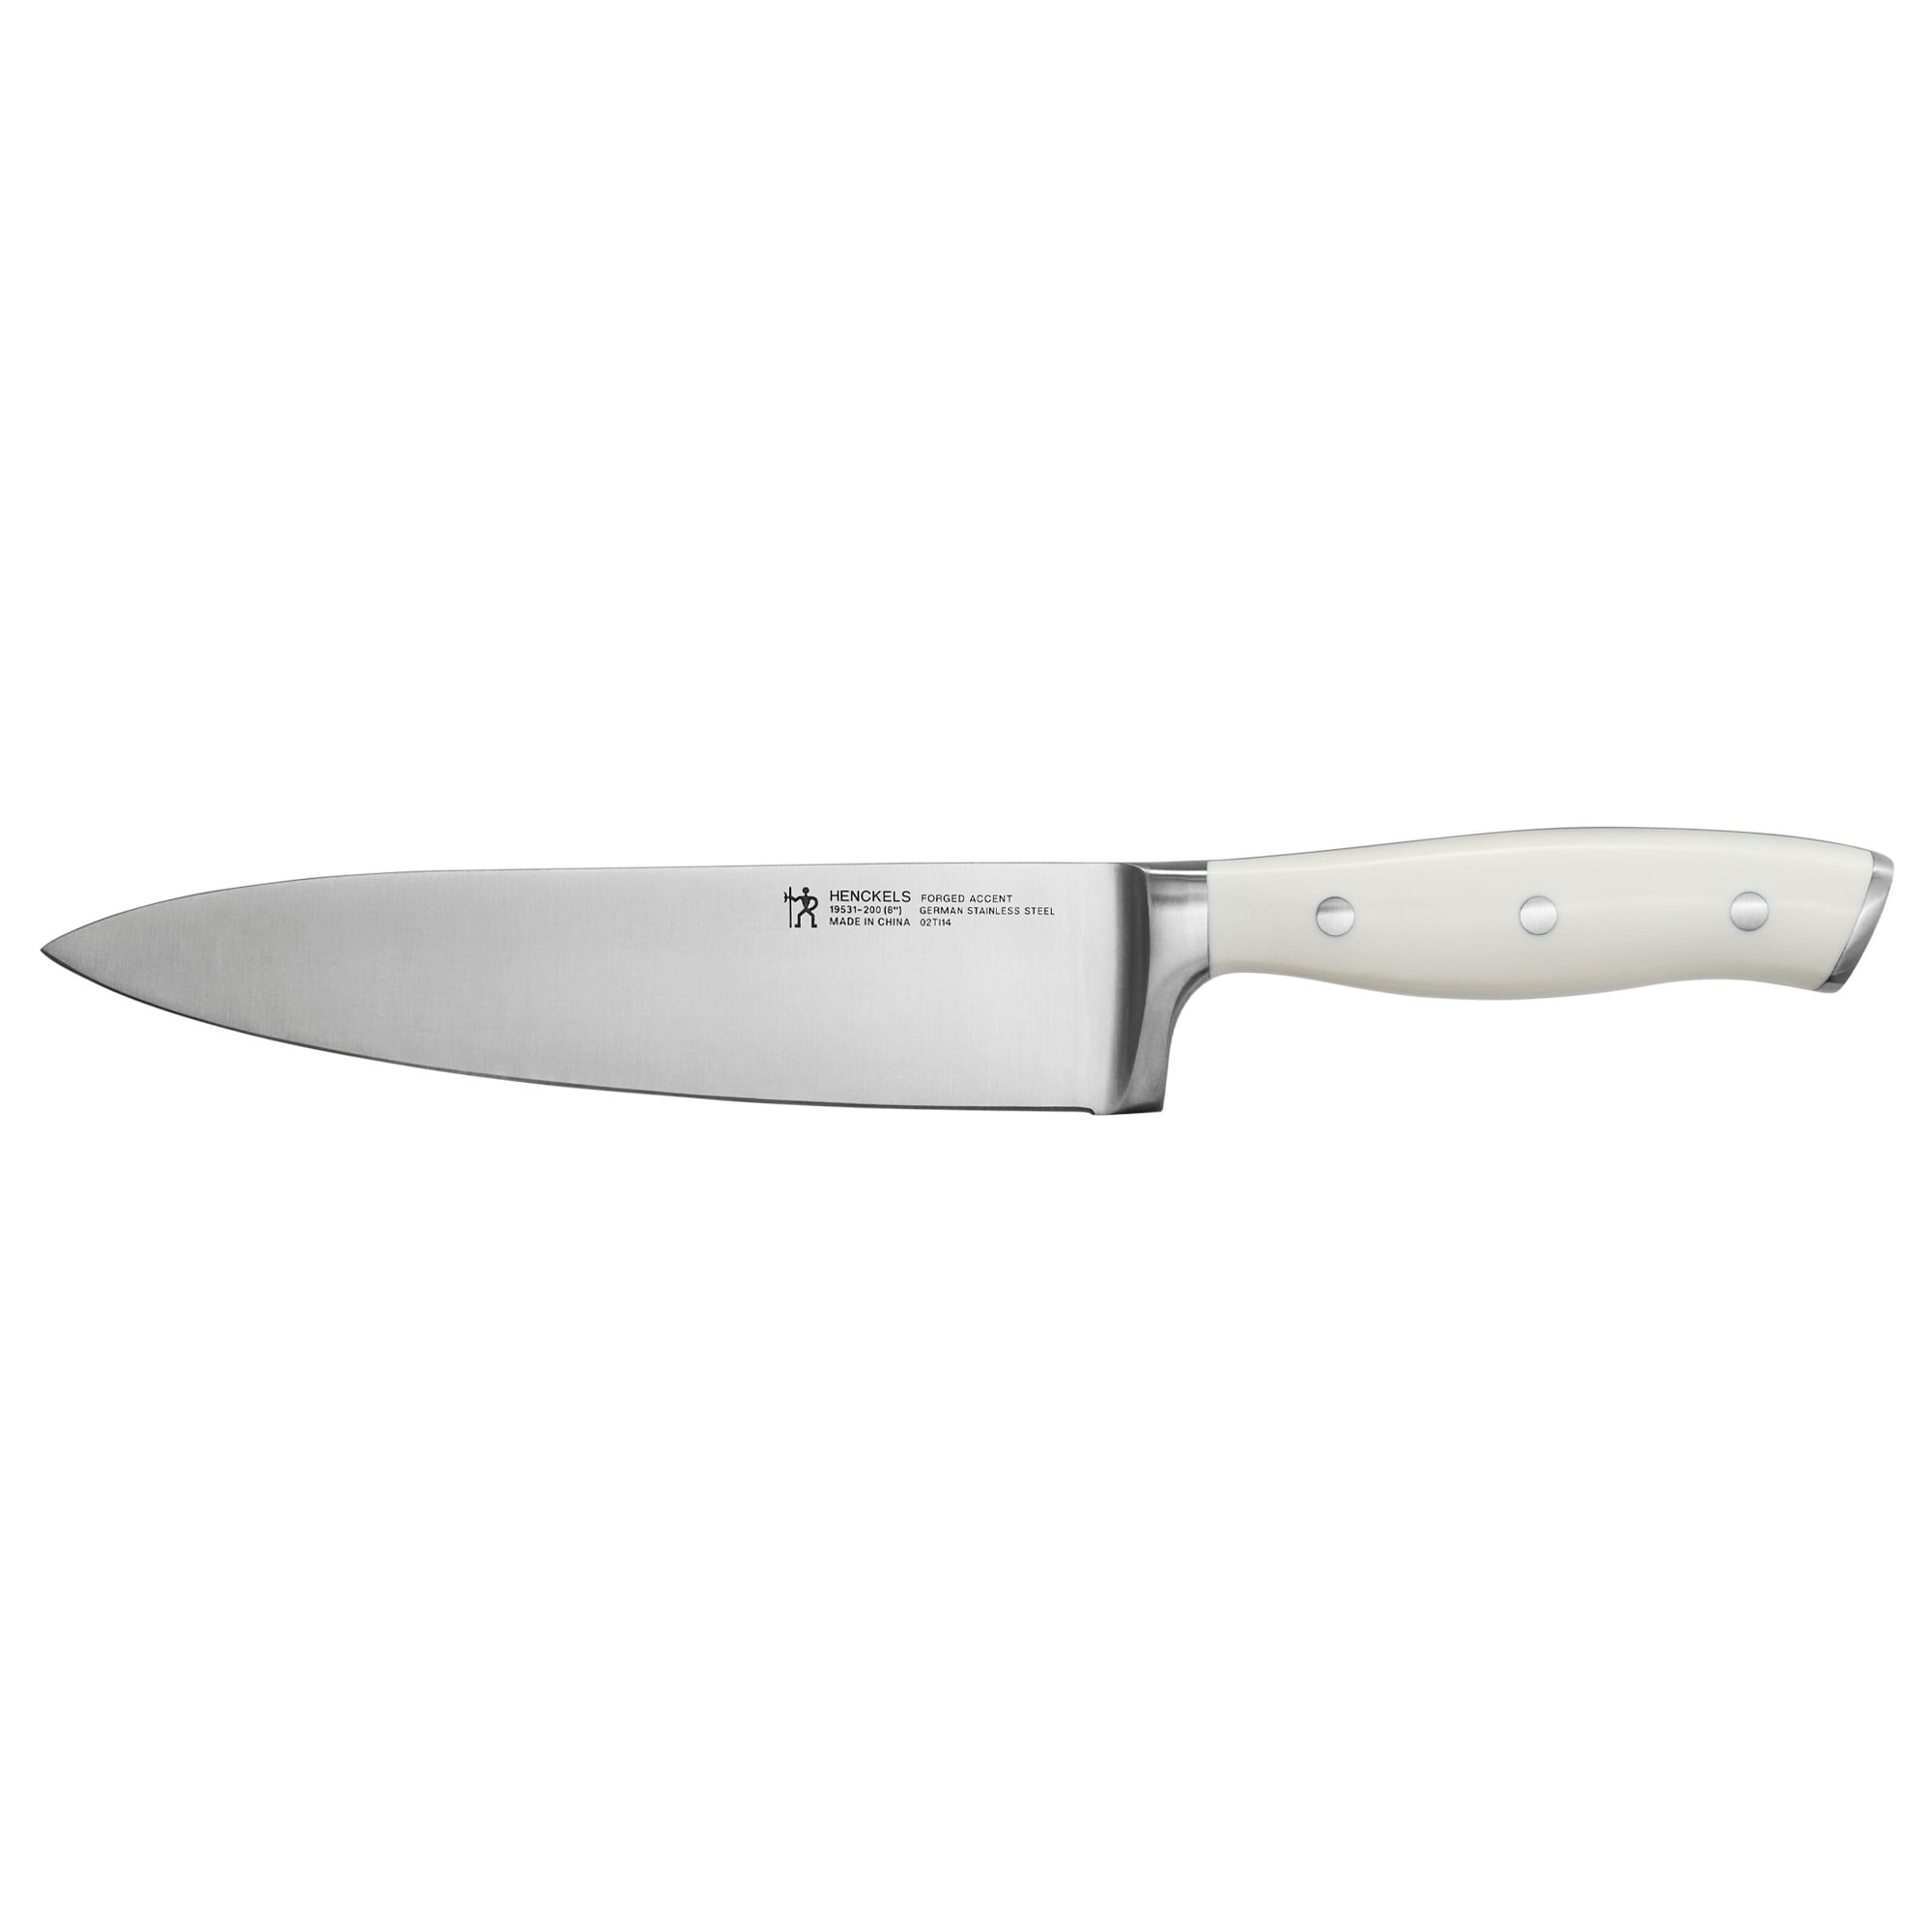 https://ak1.ostkcdn.com/images/products/is/images/direct/54ed6391ccf2f454eb01a953a6eb6416ae89e87d/Henckels-Forged-Accent-8-inch-Chef%27s-Knife---White-Handle.jpg